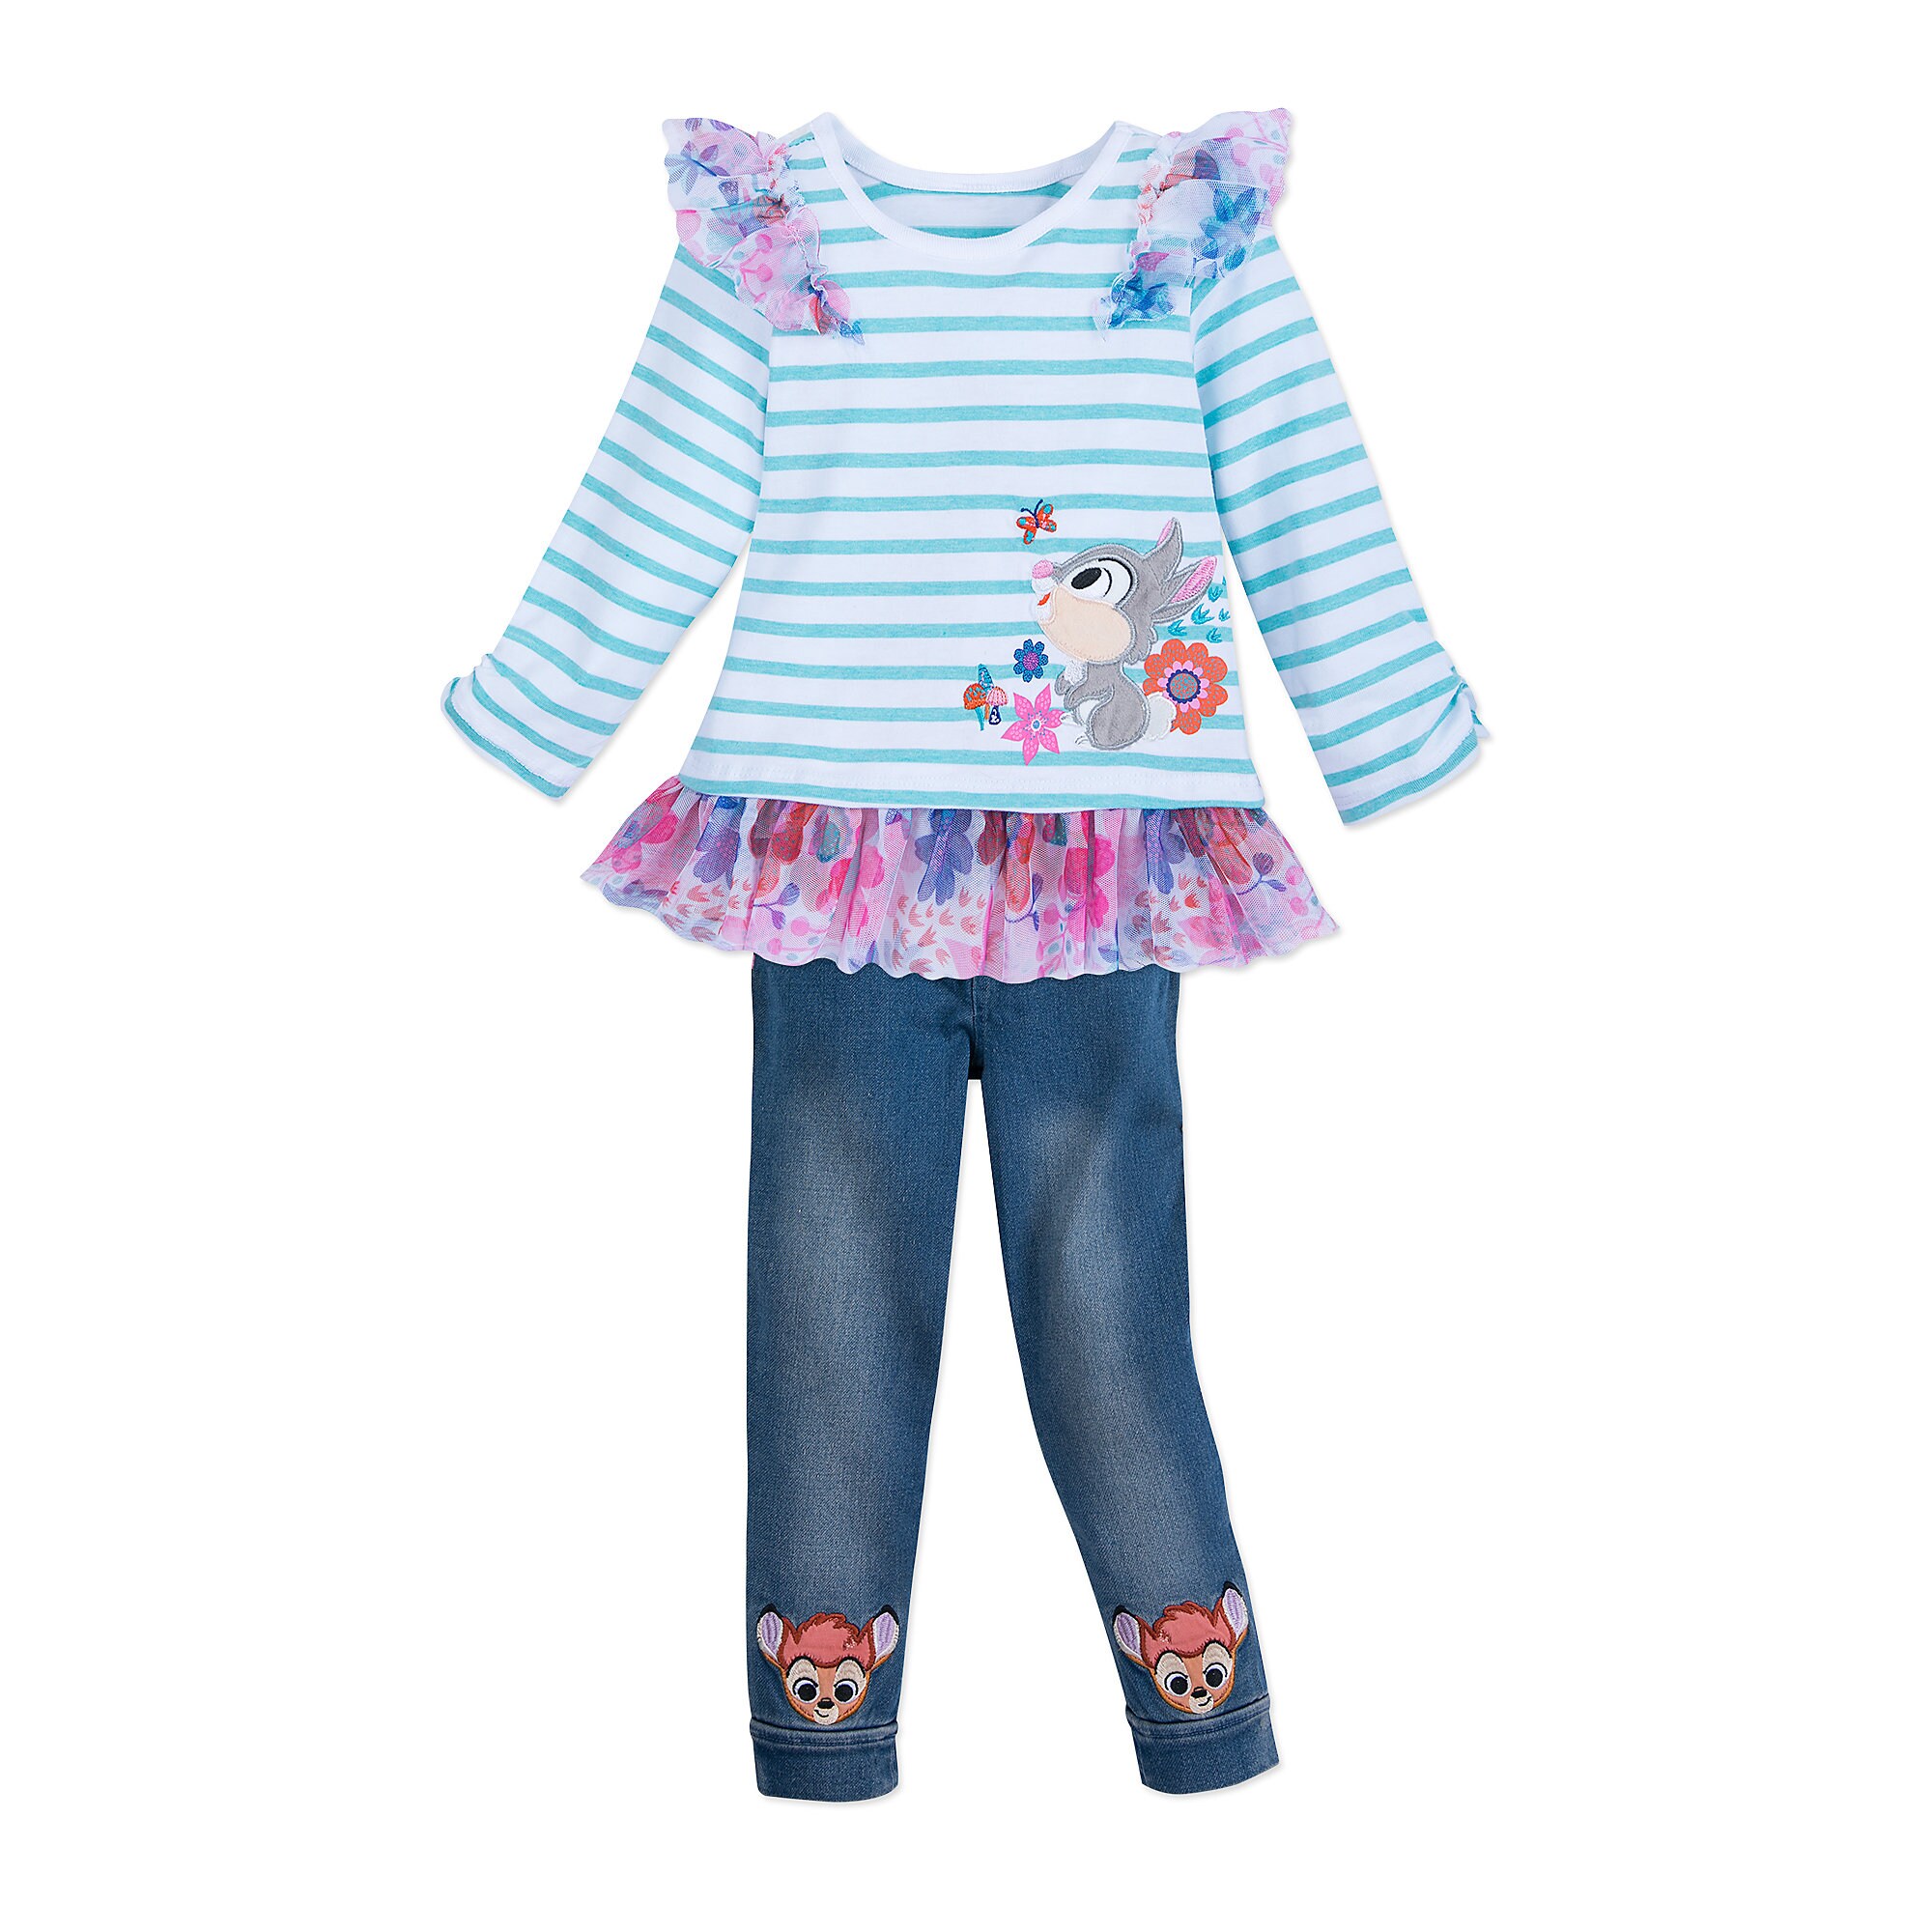 Bambi Striped Top and Jean Set for Girls - Disney Furrytale friends